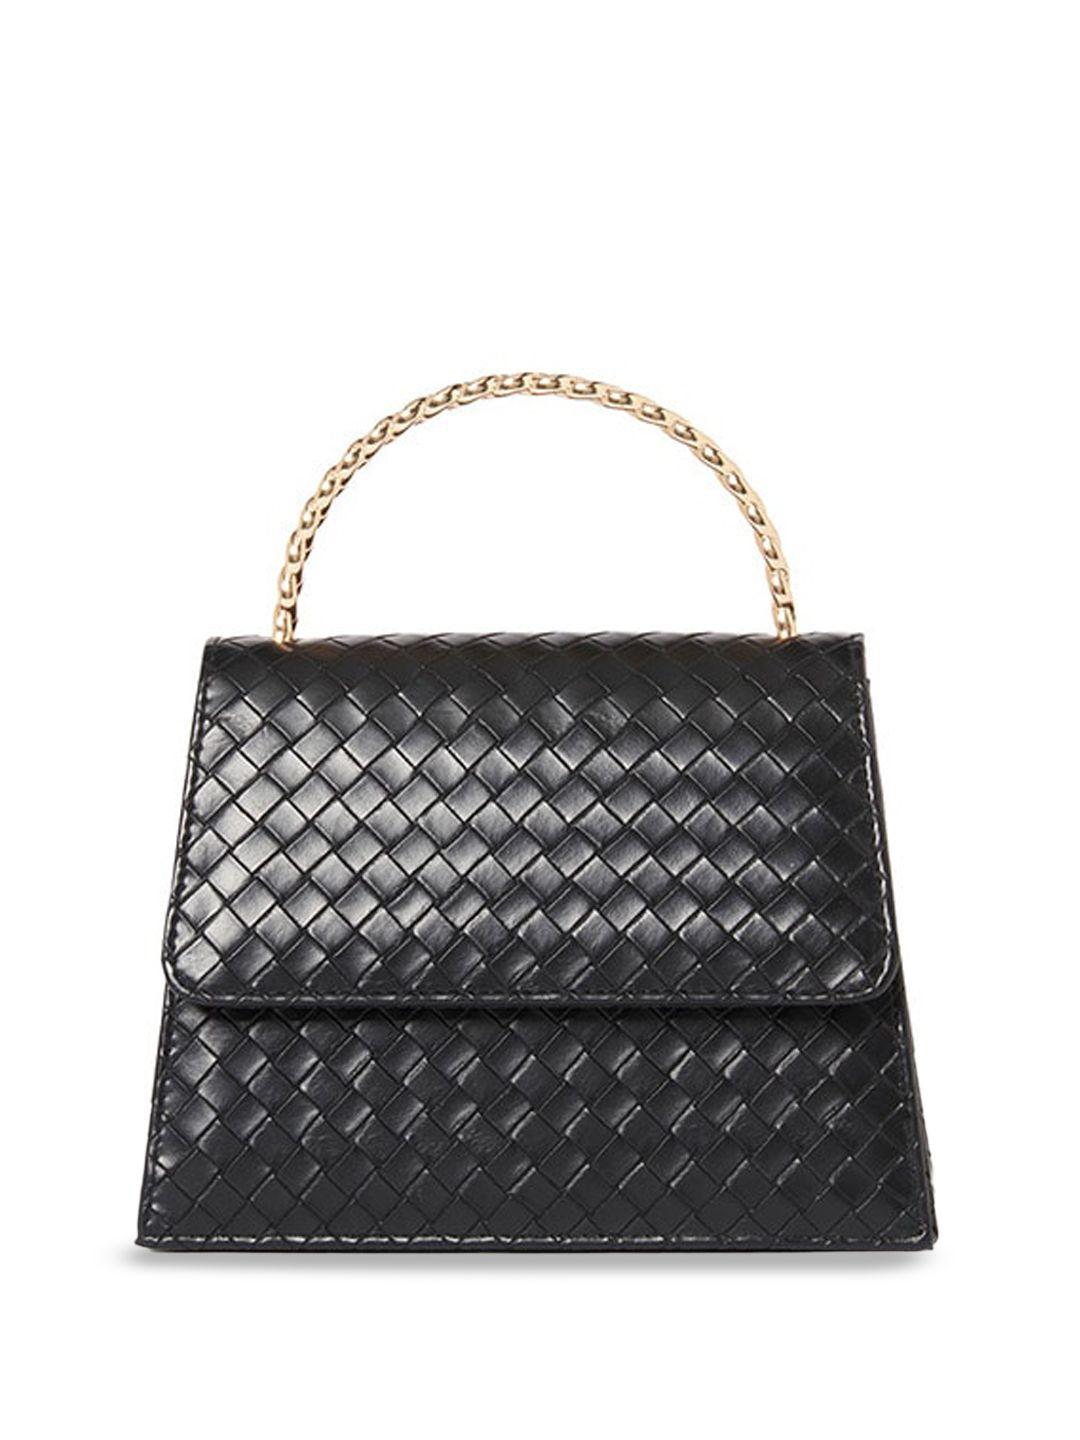 forever new textured structured sling bag